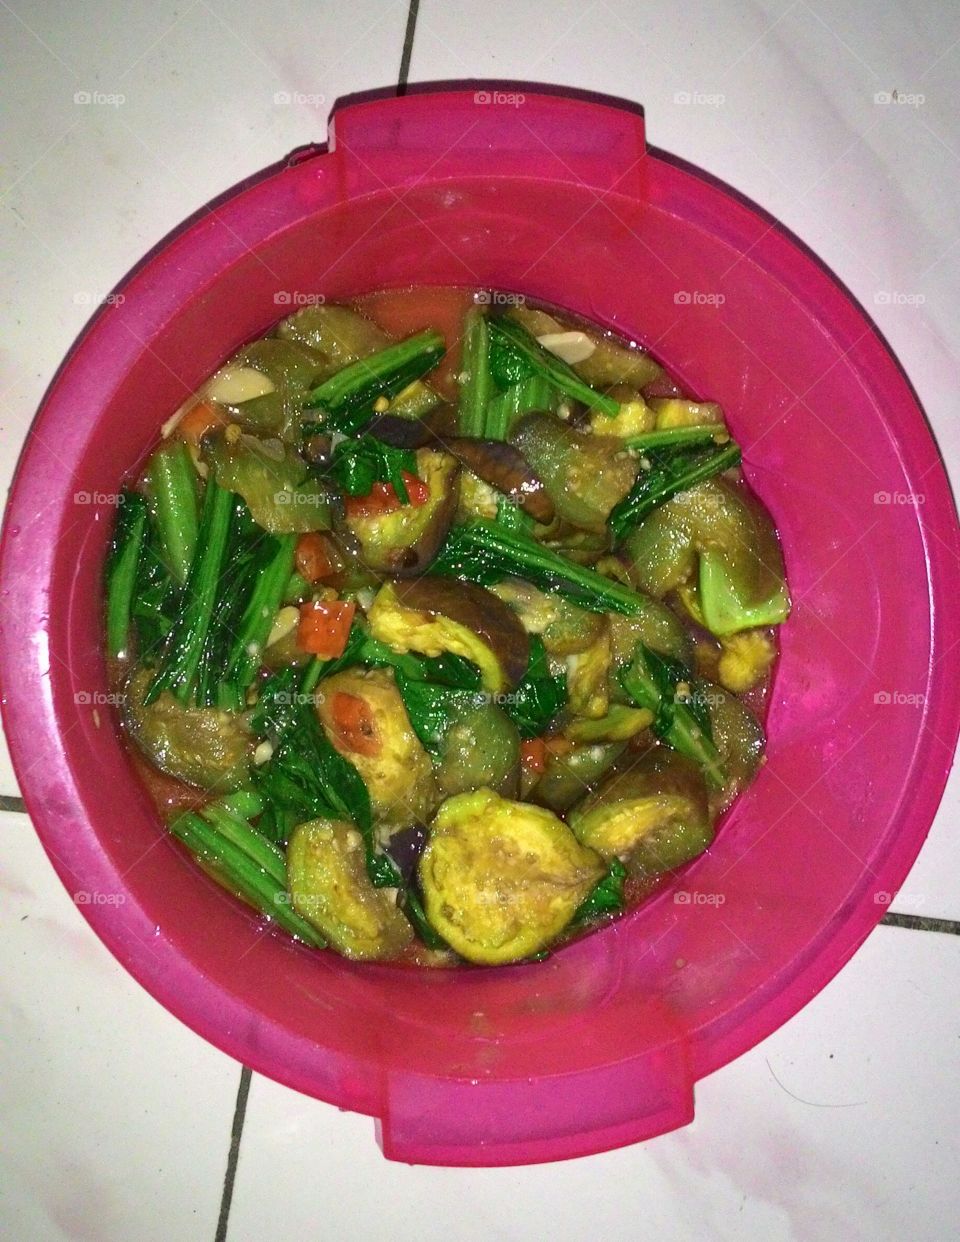 eggplant vegetable plus mustar. photo taken by me, when i was finished cook